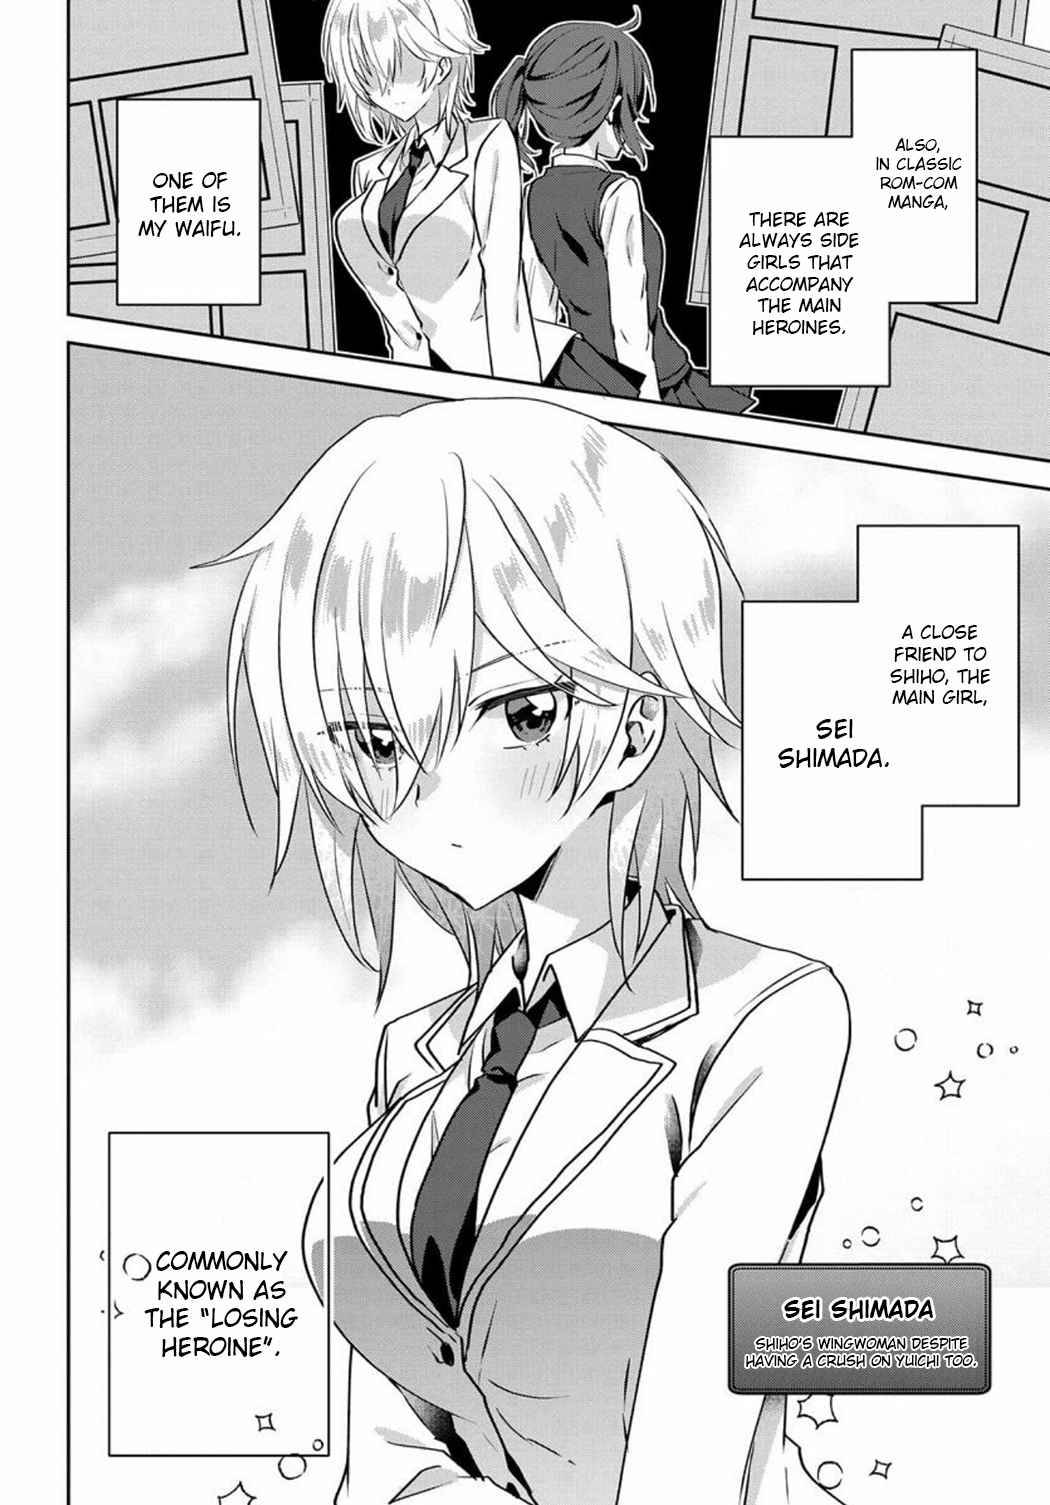 Since I’Ve Entered The World Of Romantic Comedy Manga, I’Ll Do My Best To Make The Losing Heroine Happy - chapter 1 - #5